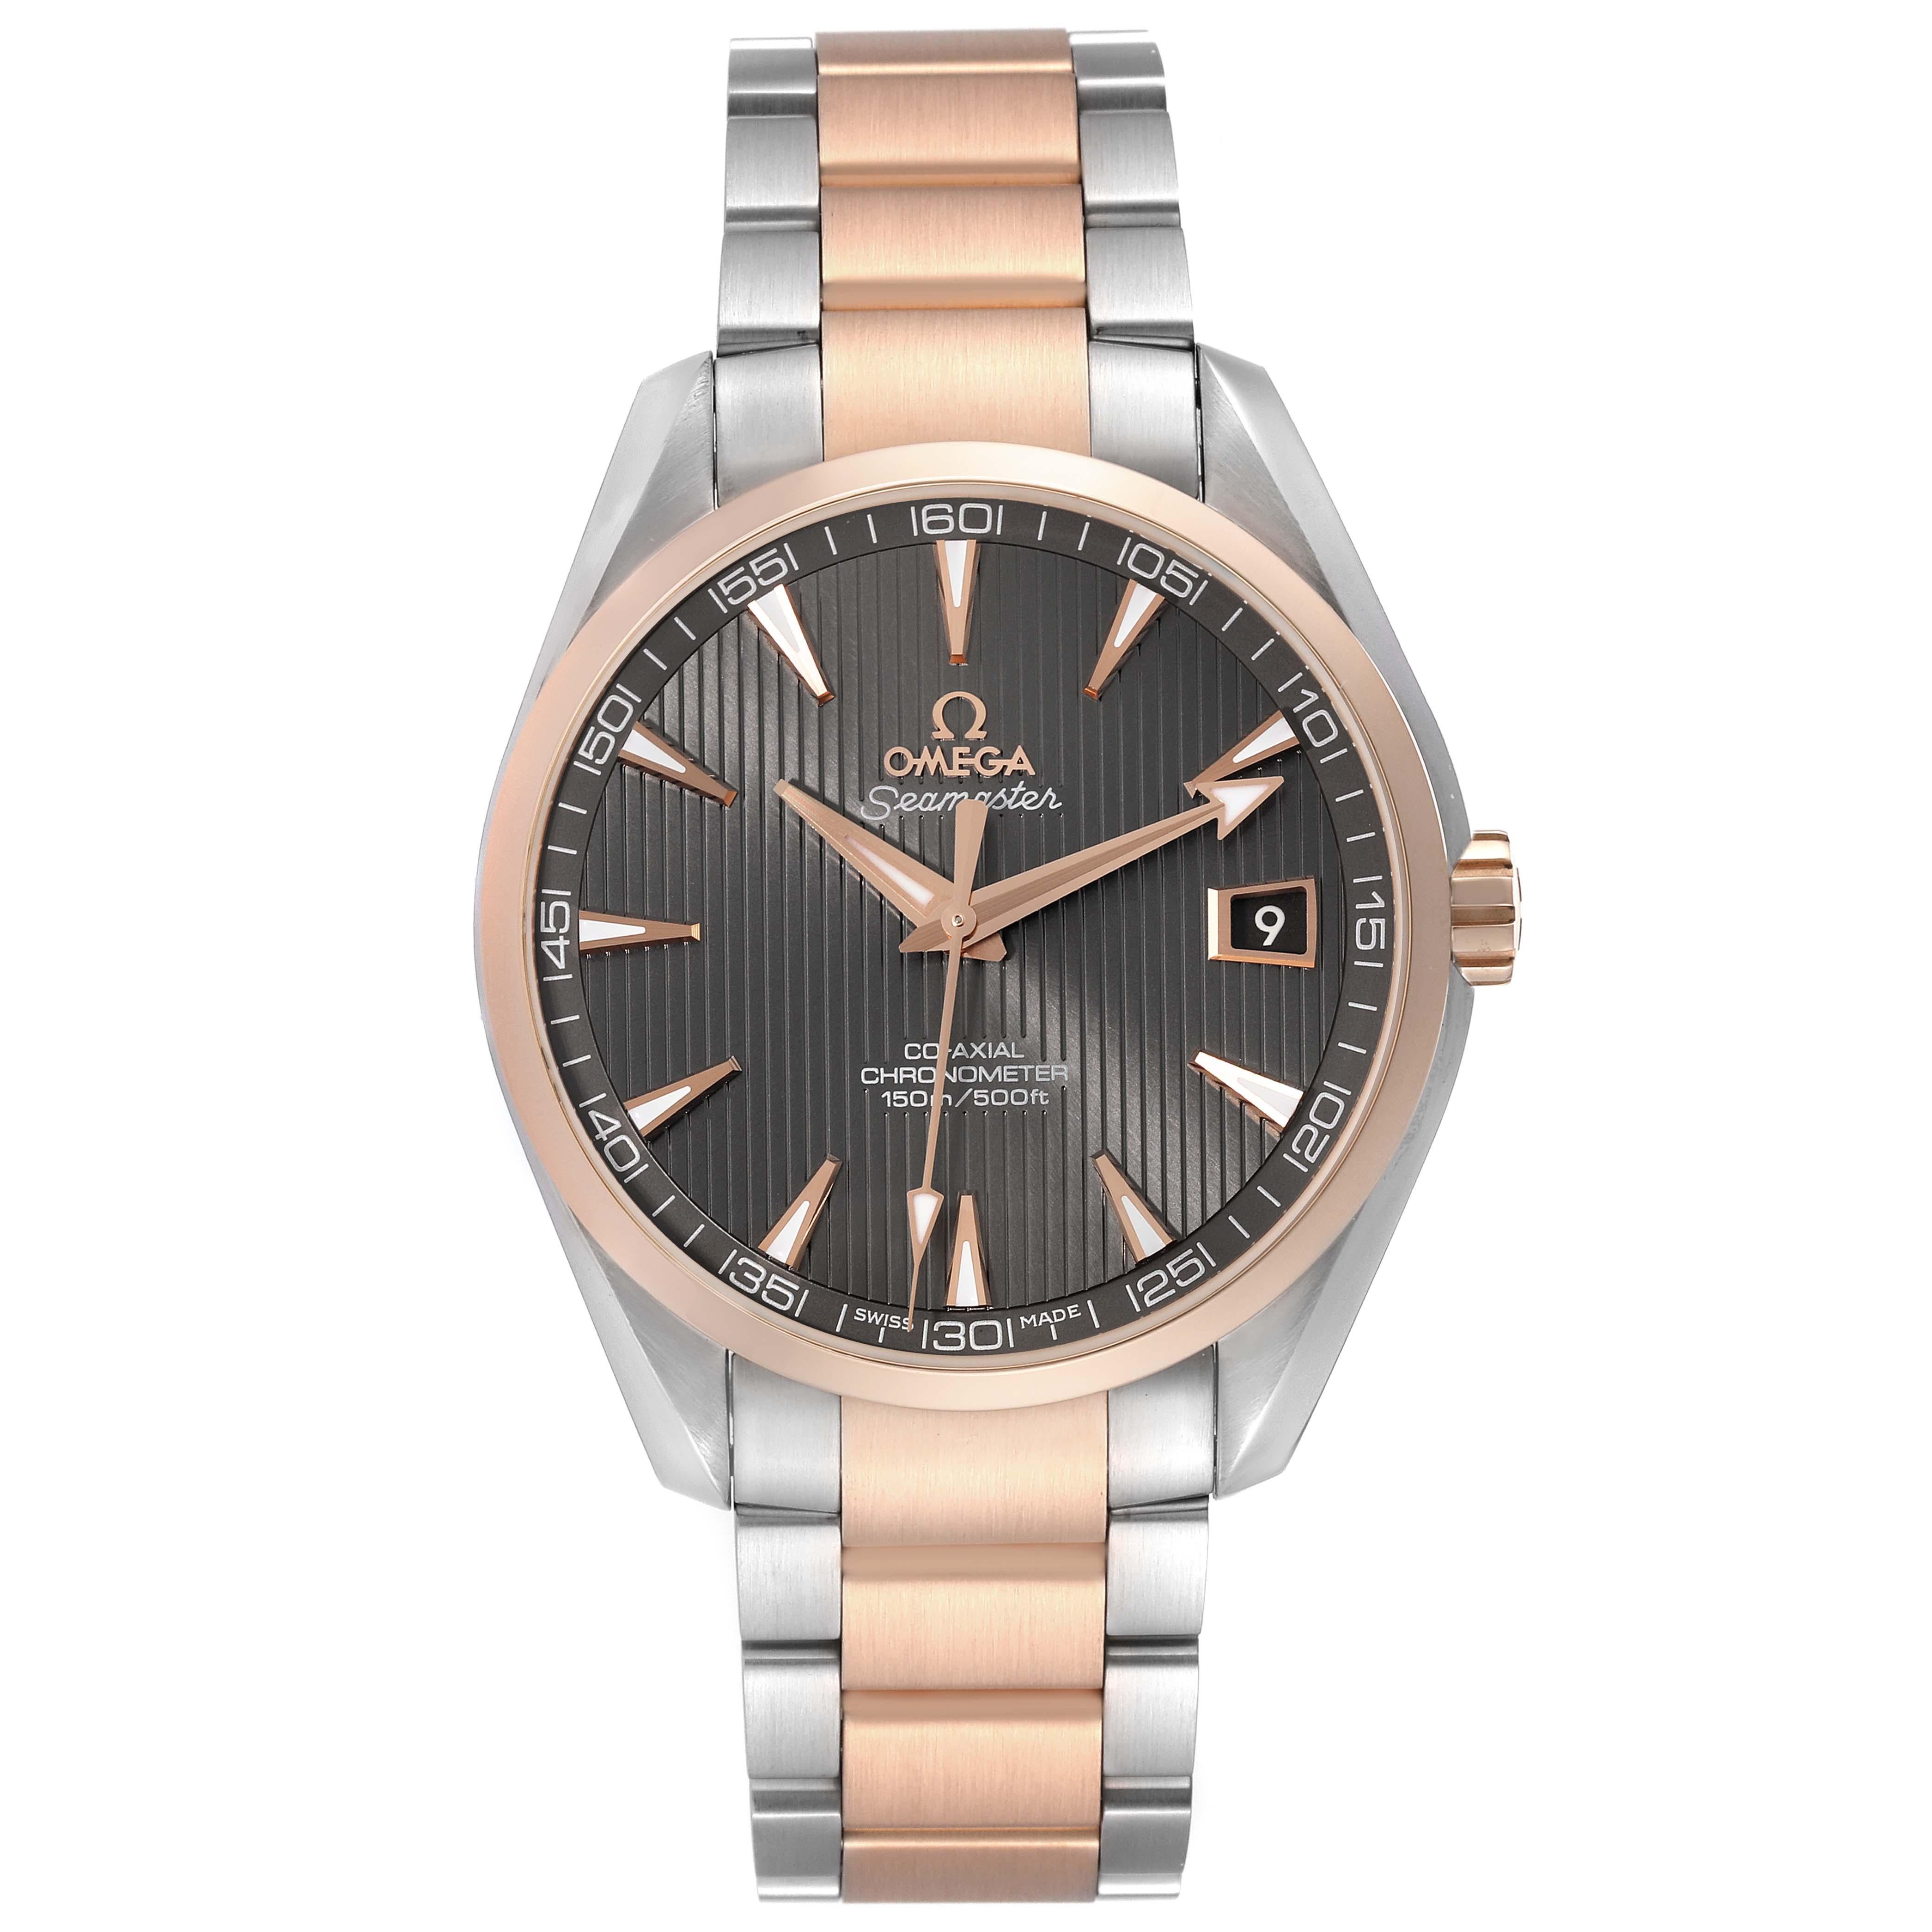 Omega Seamaster Aqua Terra Steel Rose Gold Watch 231.20.42.21.06.001 Box Card. Automatic self-winding movement. Stainless steel round case 41.5 mm in diameter. Exhibition transparent sapphire crystal caseback. 18k rose gold smooth bezel. Scratch